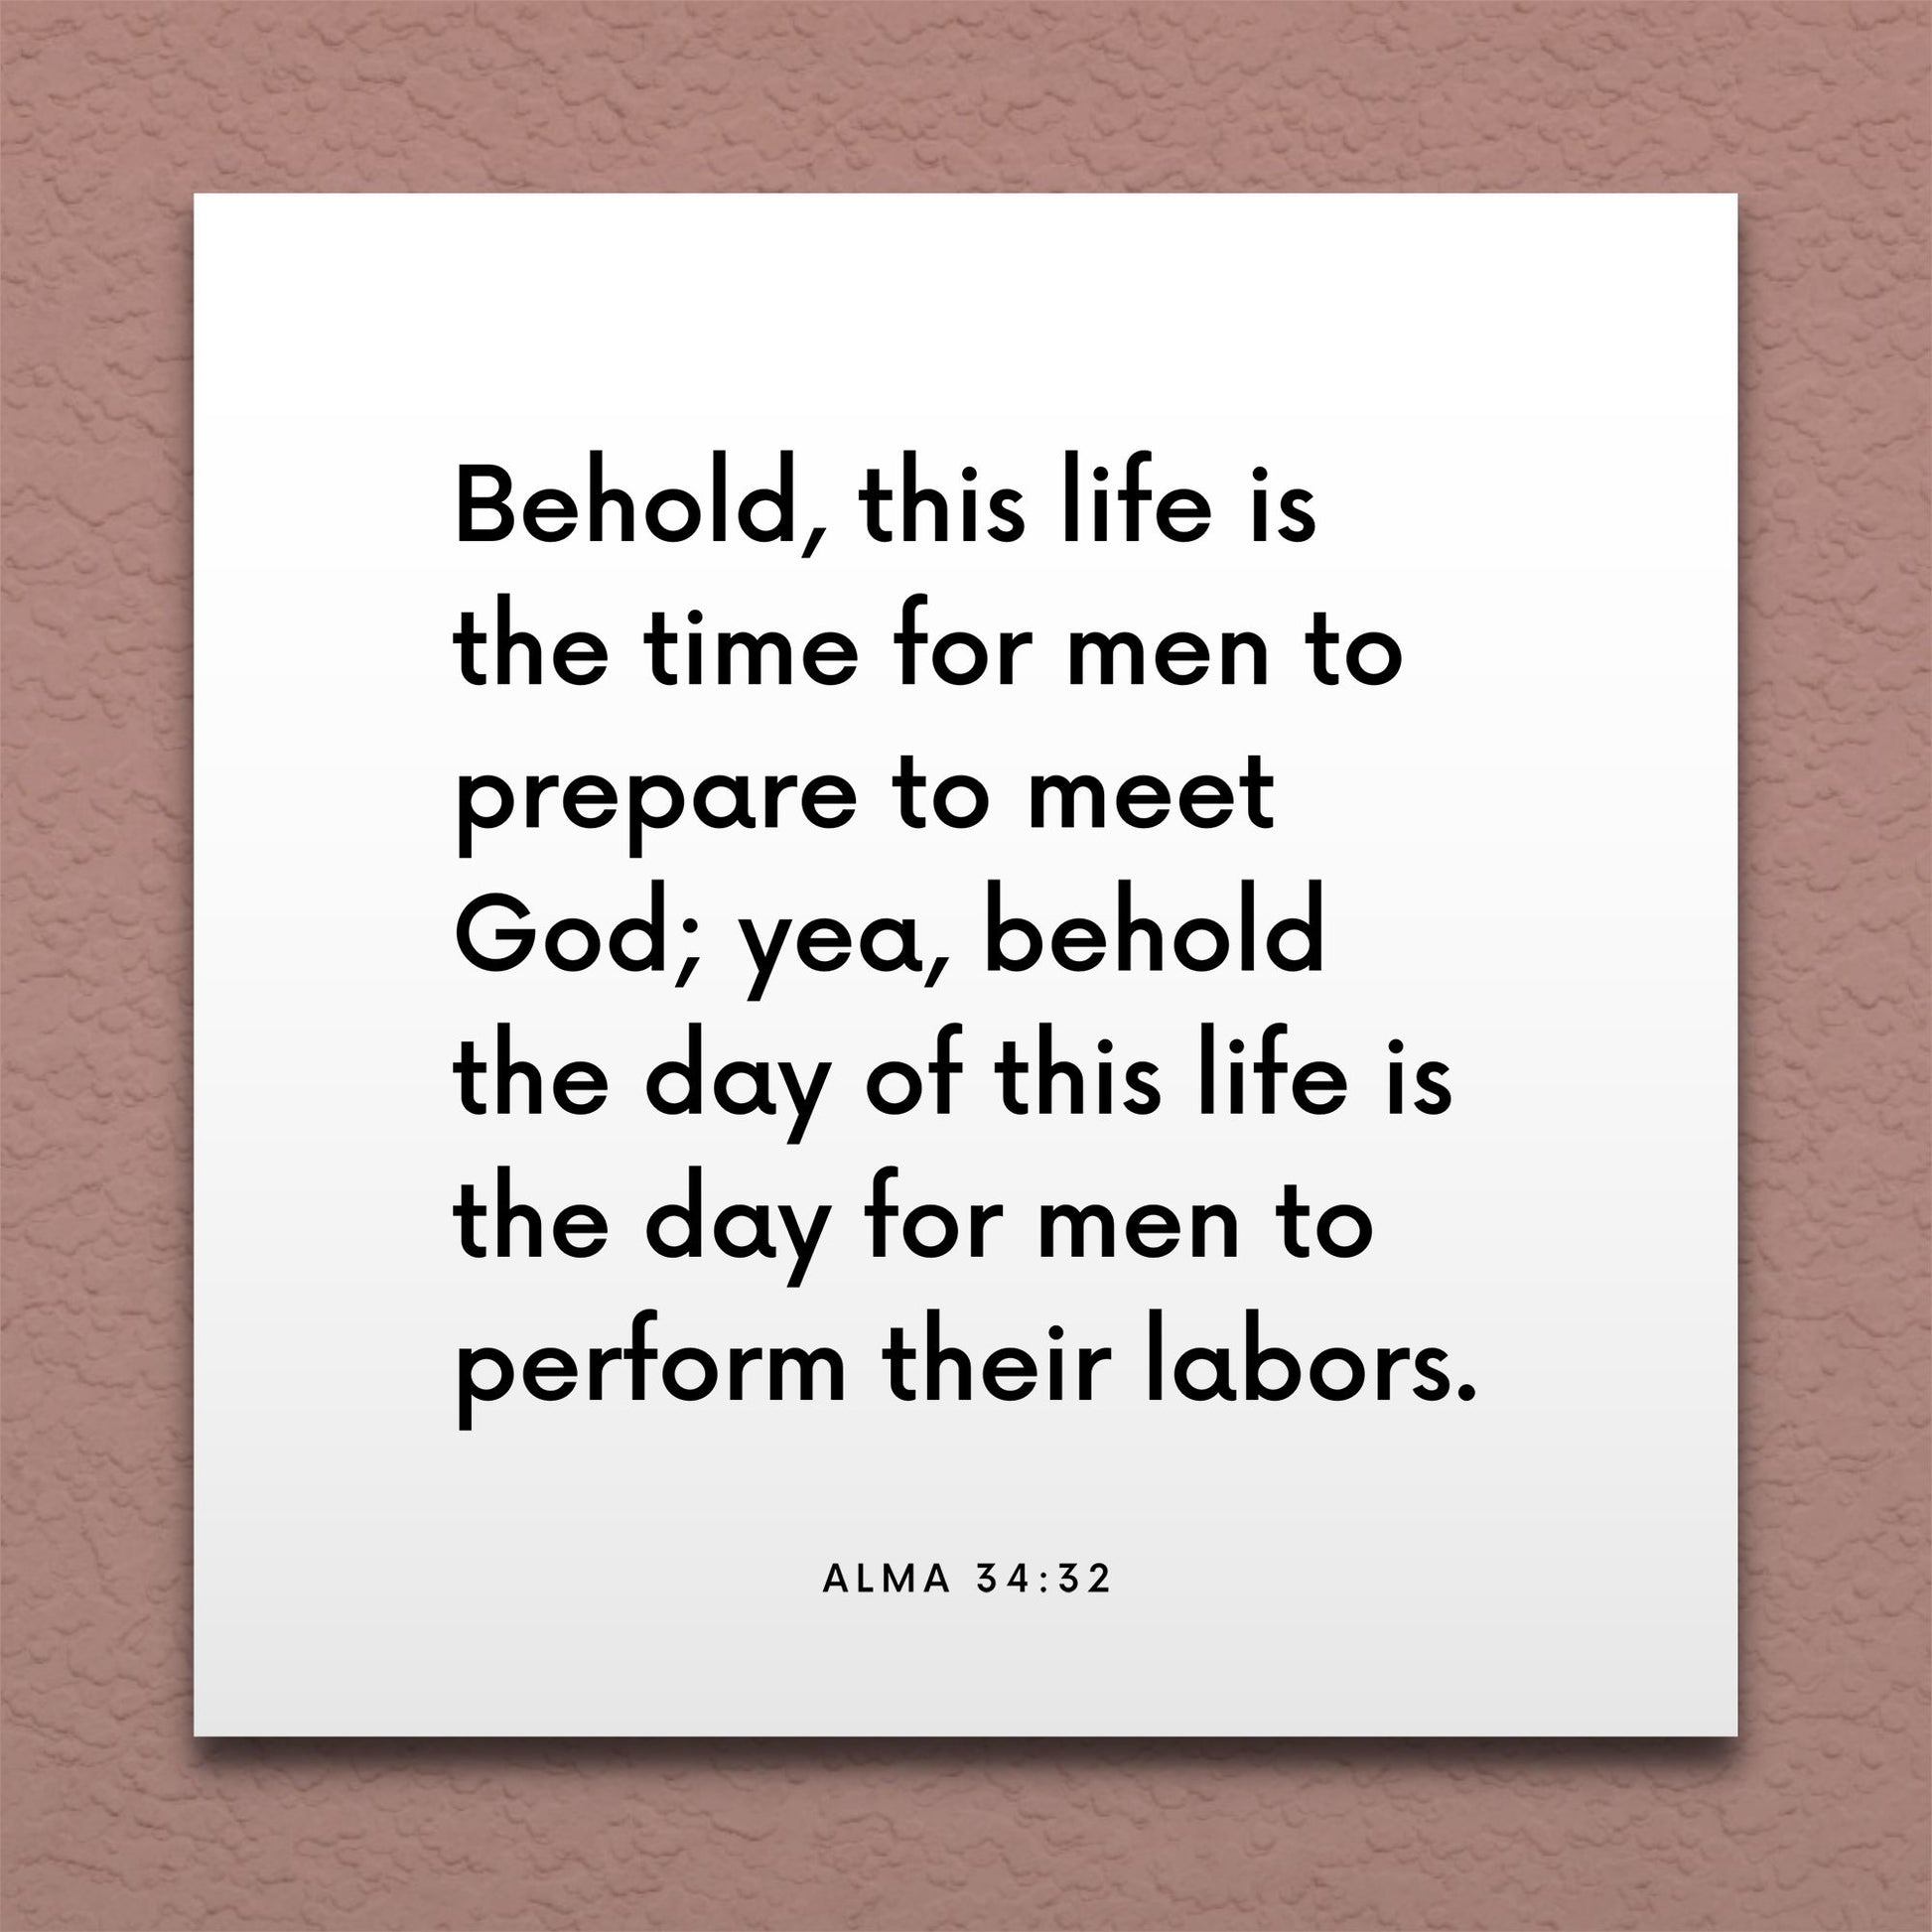 Wall-mounted scripture tile for Alma 34:32 - "This life is the time for men to prepare to meet God"